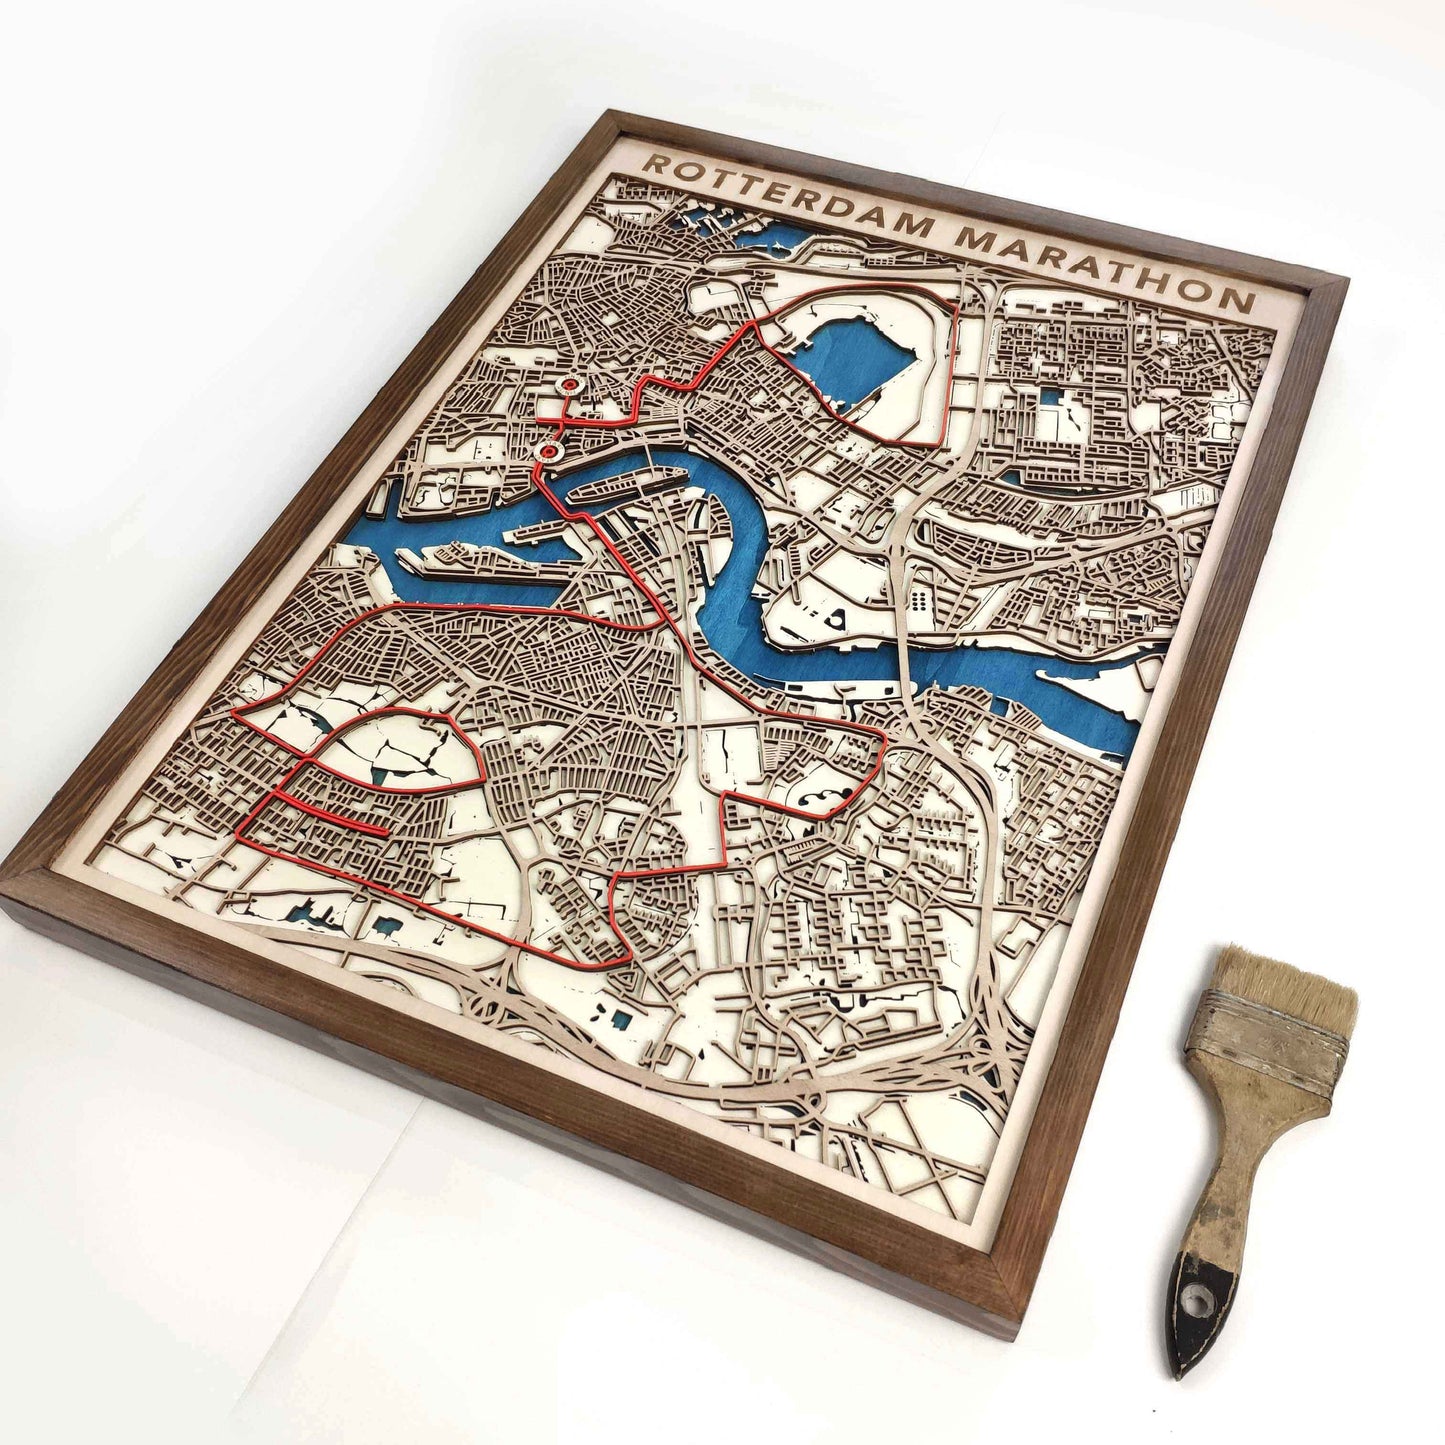 Rotterdam Marathon Laser-Cut Wooden Map – Unique Runner Poster Gift by CityWood - Custom Wood Map Art - Unique Laser Cut Engraved - Anniversary Gift